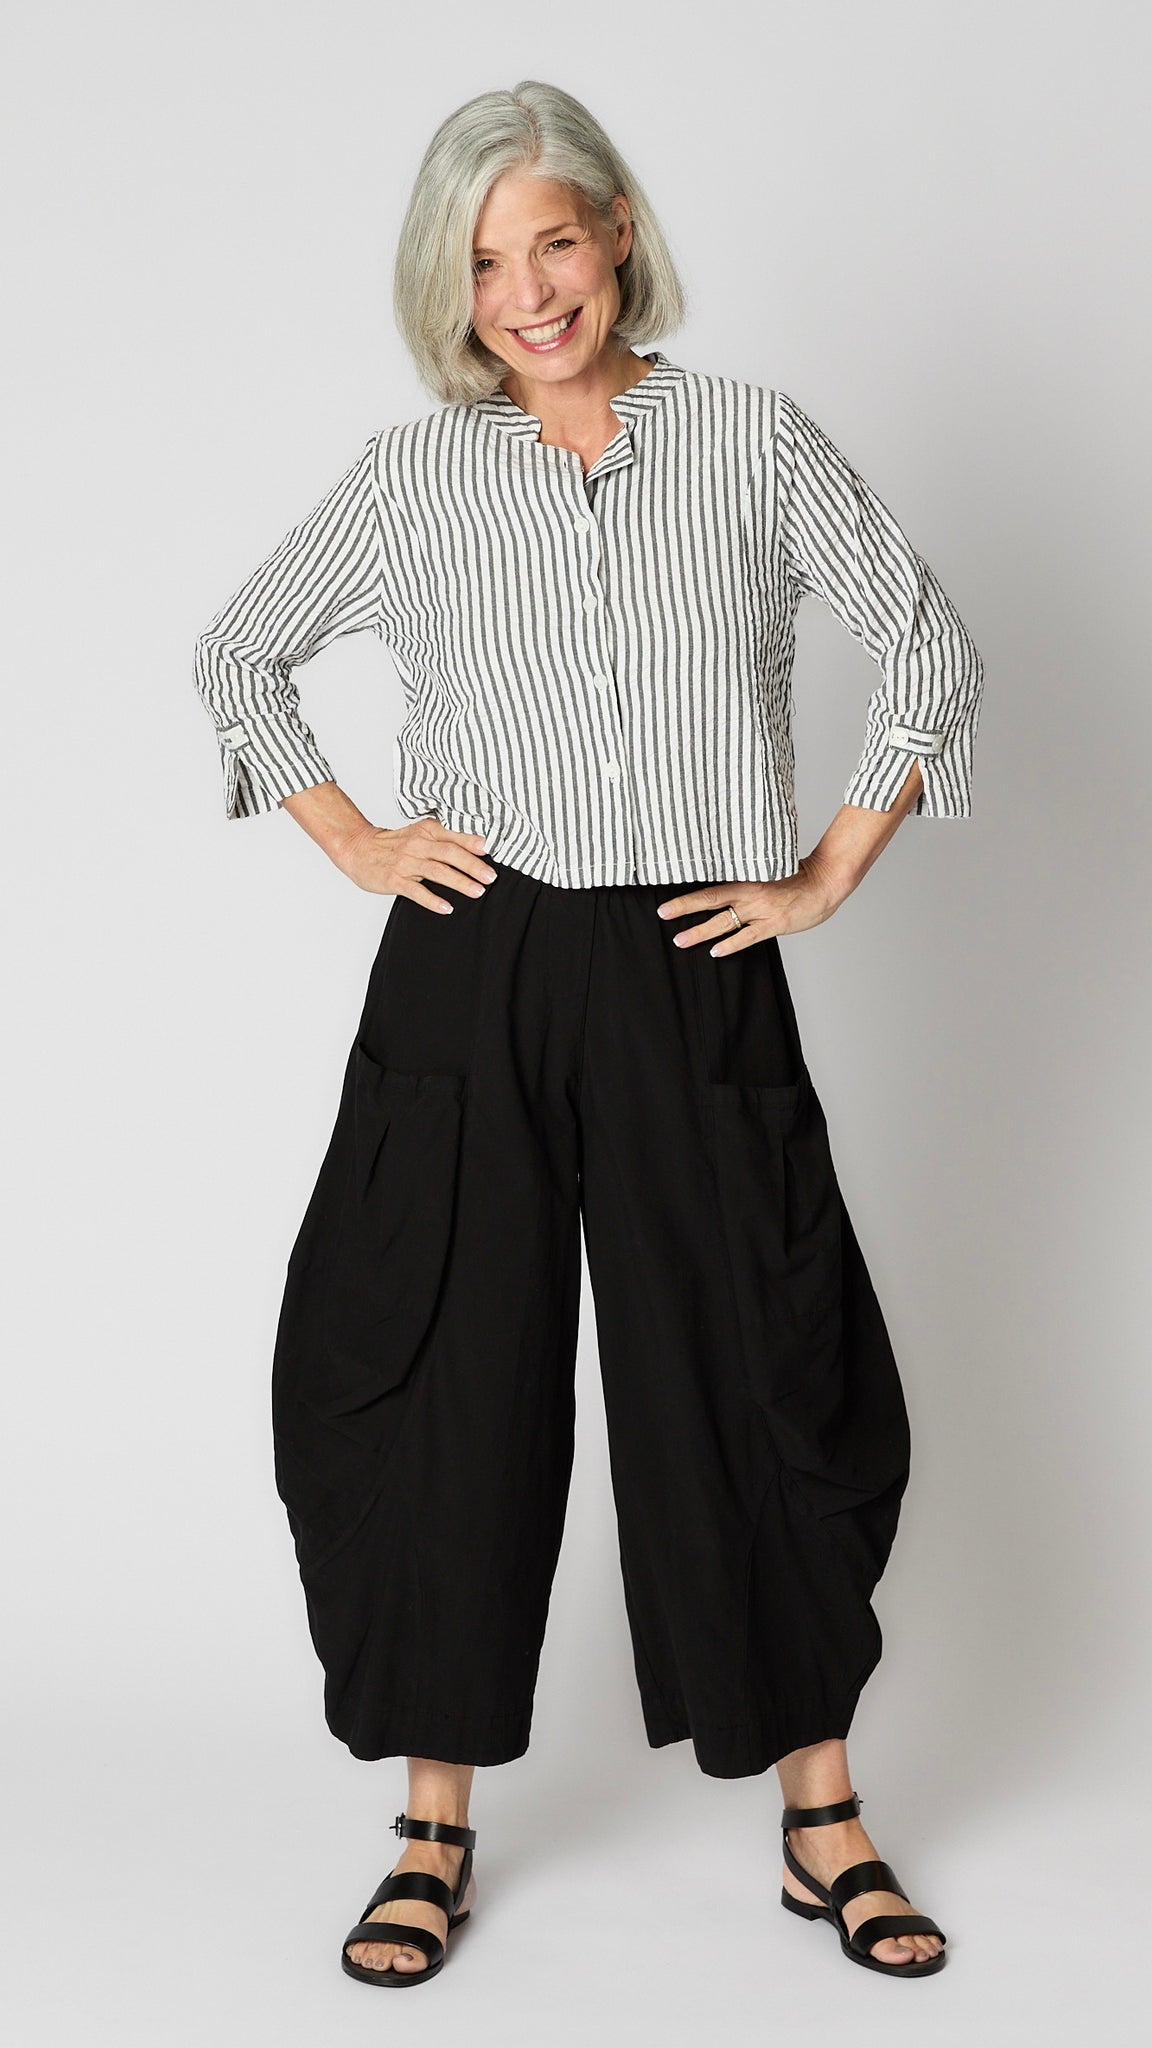 Model wearing short black and white seersucker jacket with Nehru collar, princess seams, and back tab details, black double pocket rayon pants, and black sandals.